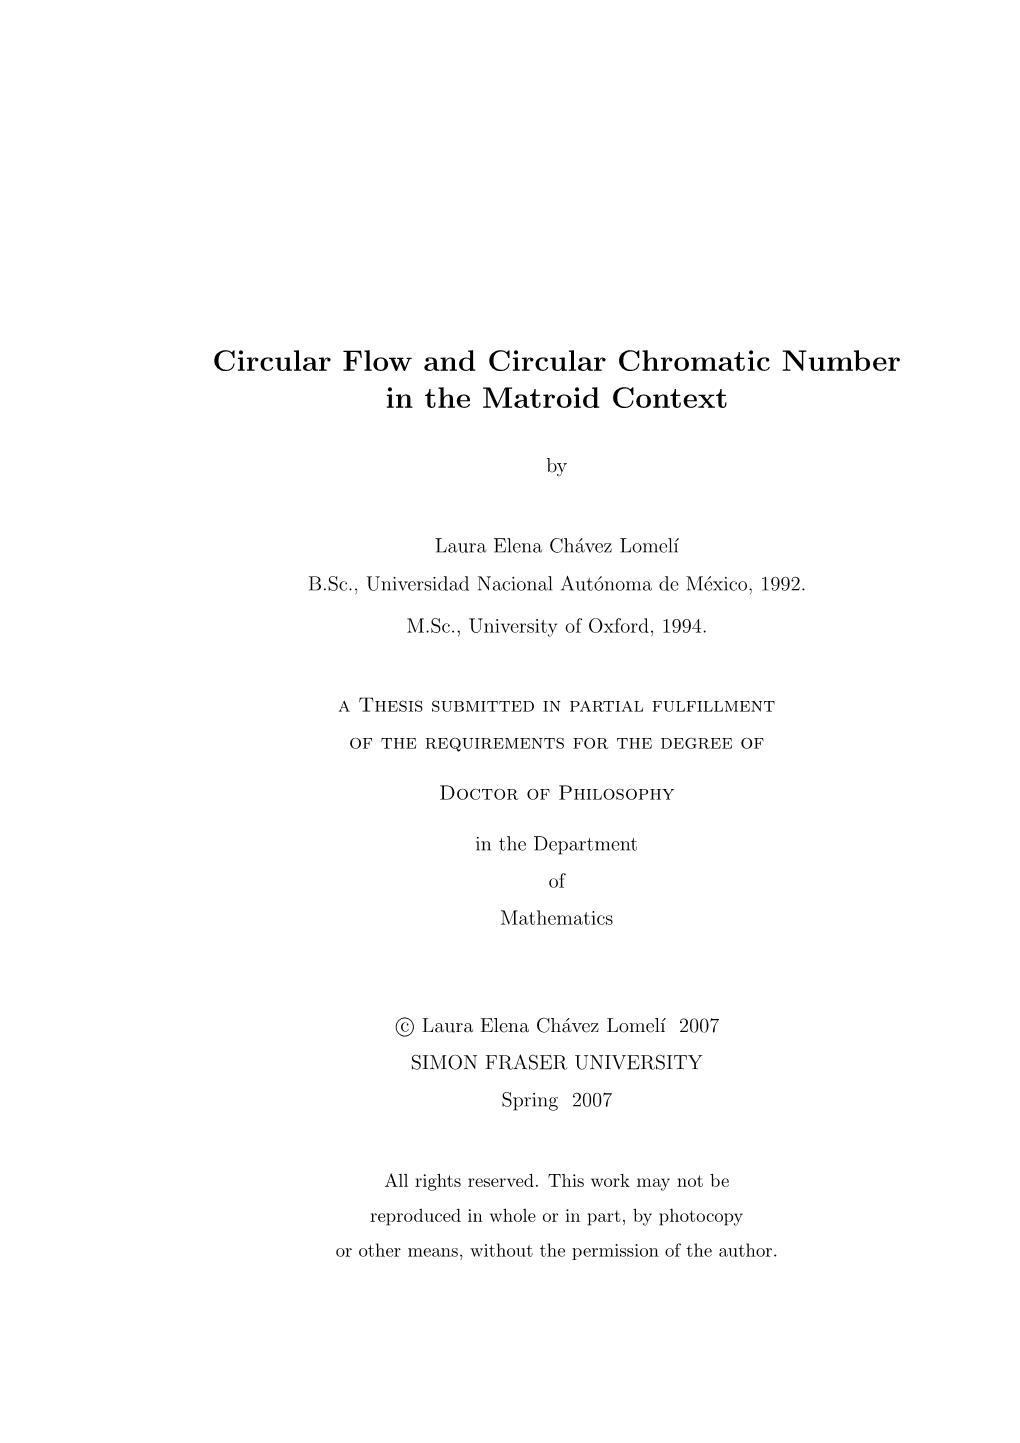 Circular Flow and Circular Chromatic Number in the Matroid Context